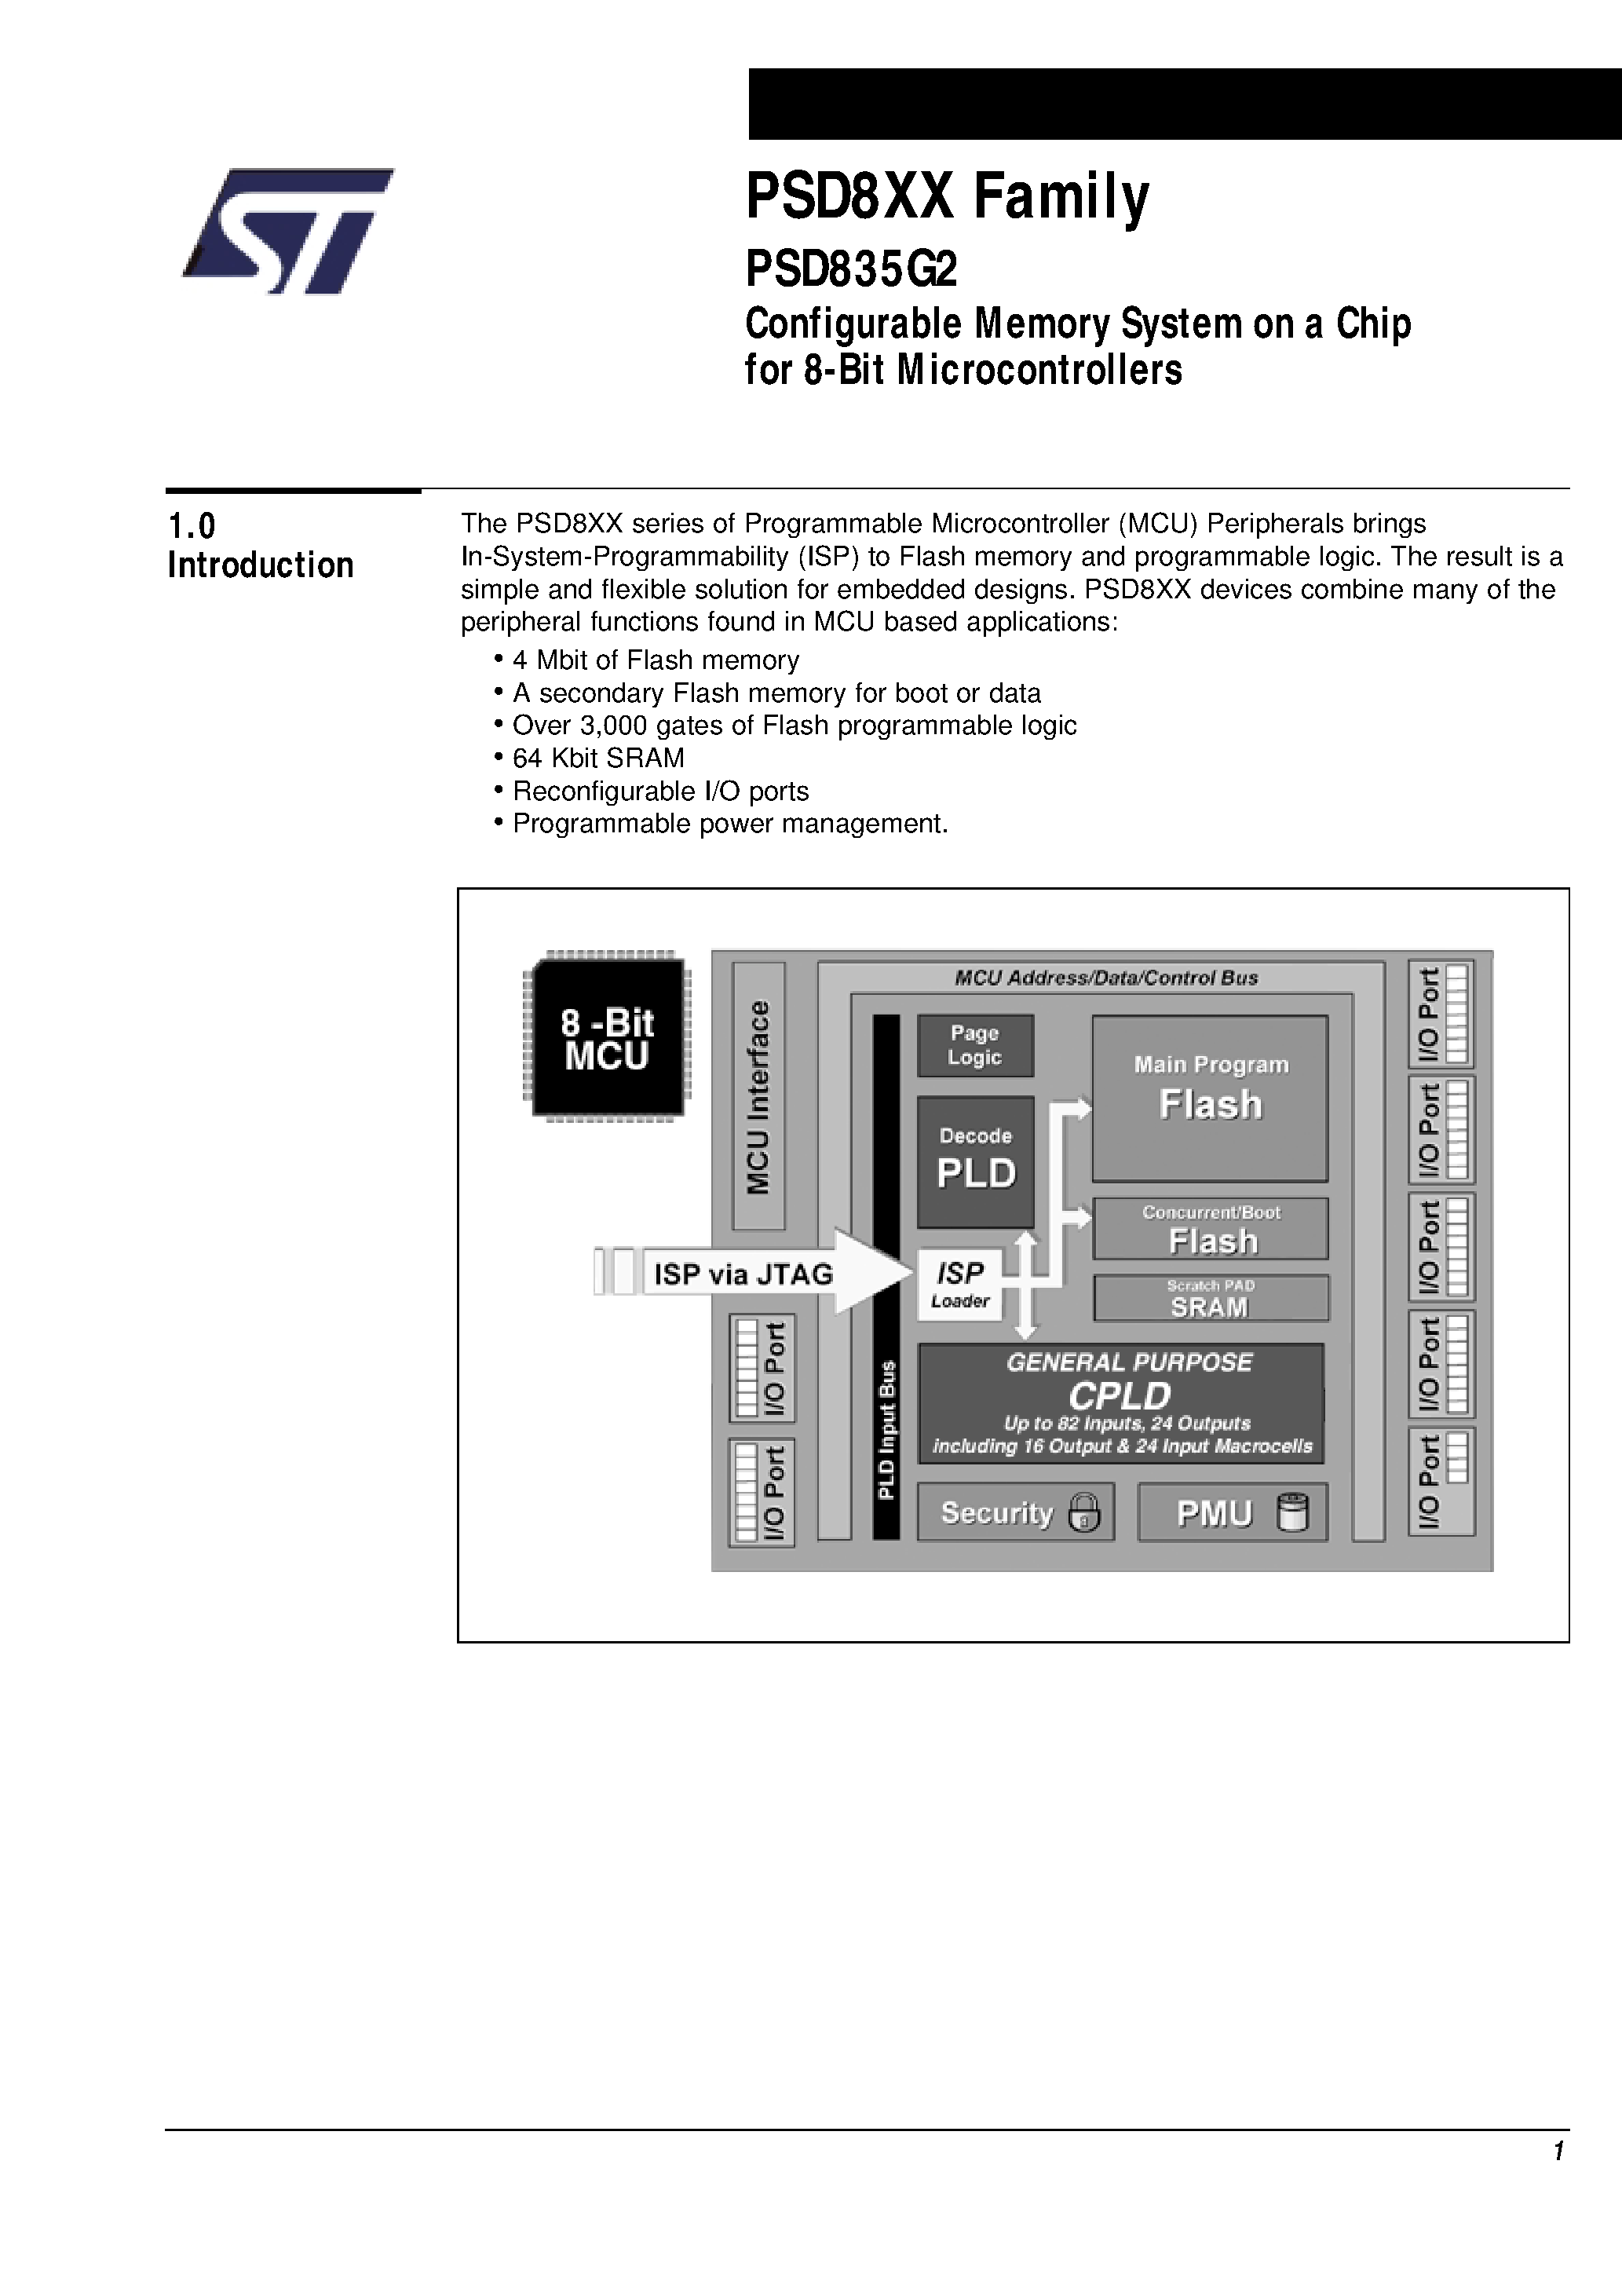 Datasheet PSD835F1-A-90B81 - Configurable Memory System on a Chip for 8-Bit Microcontrollers page 2